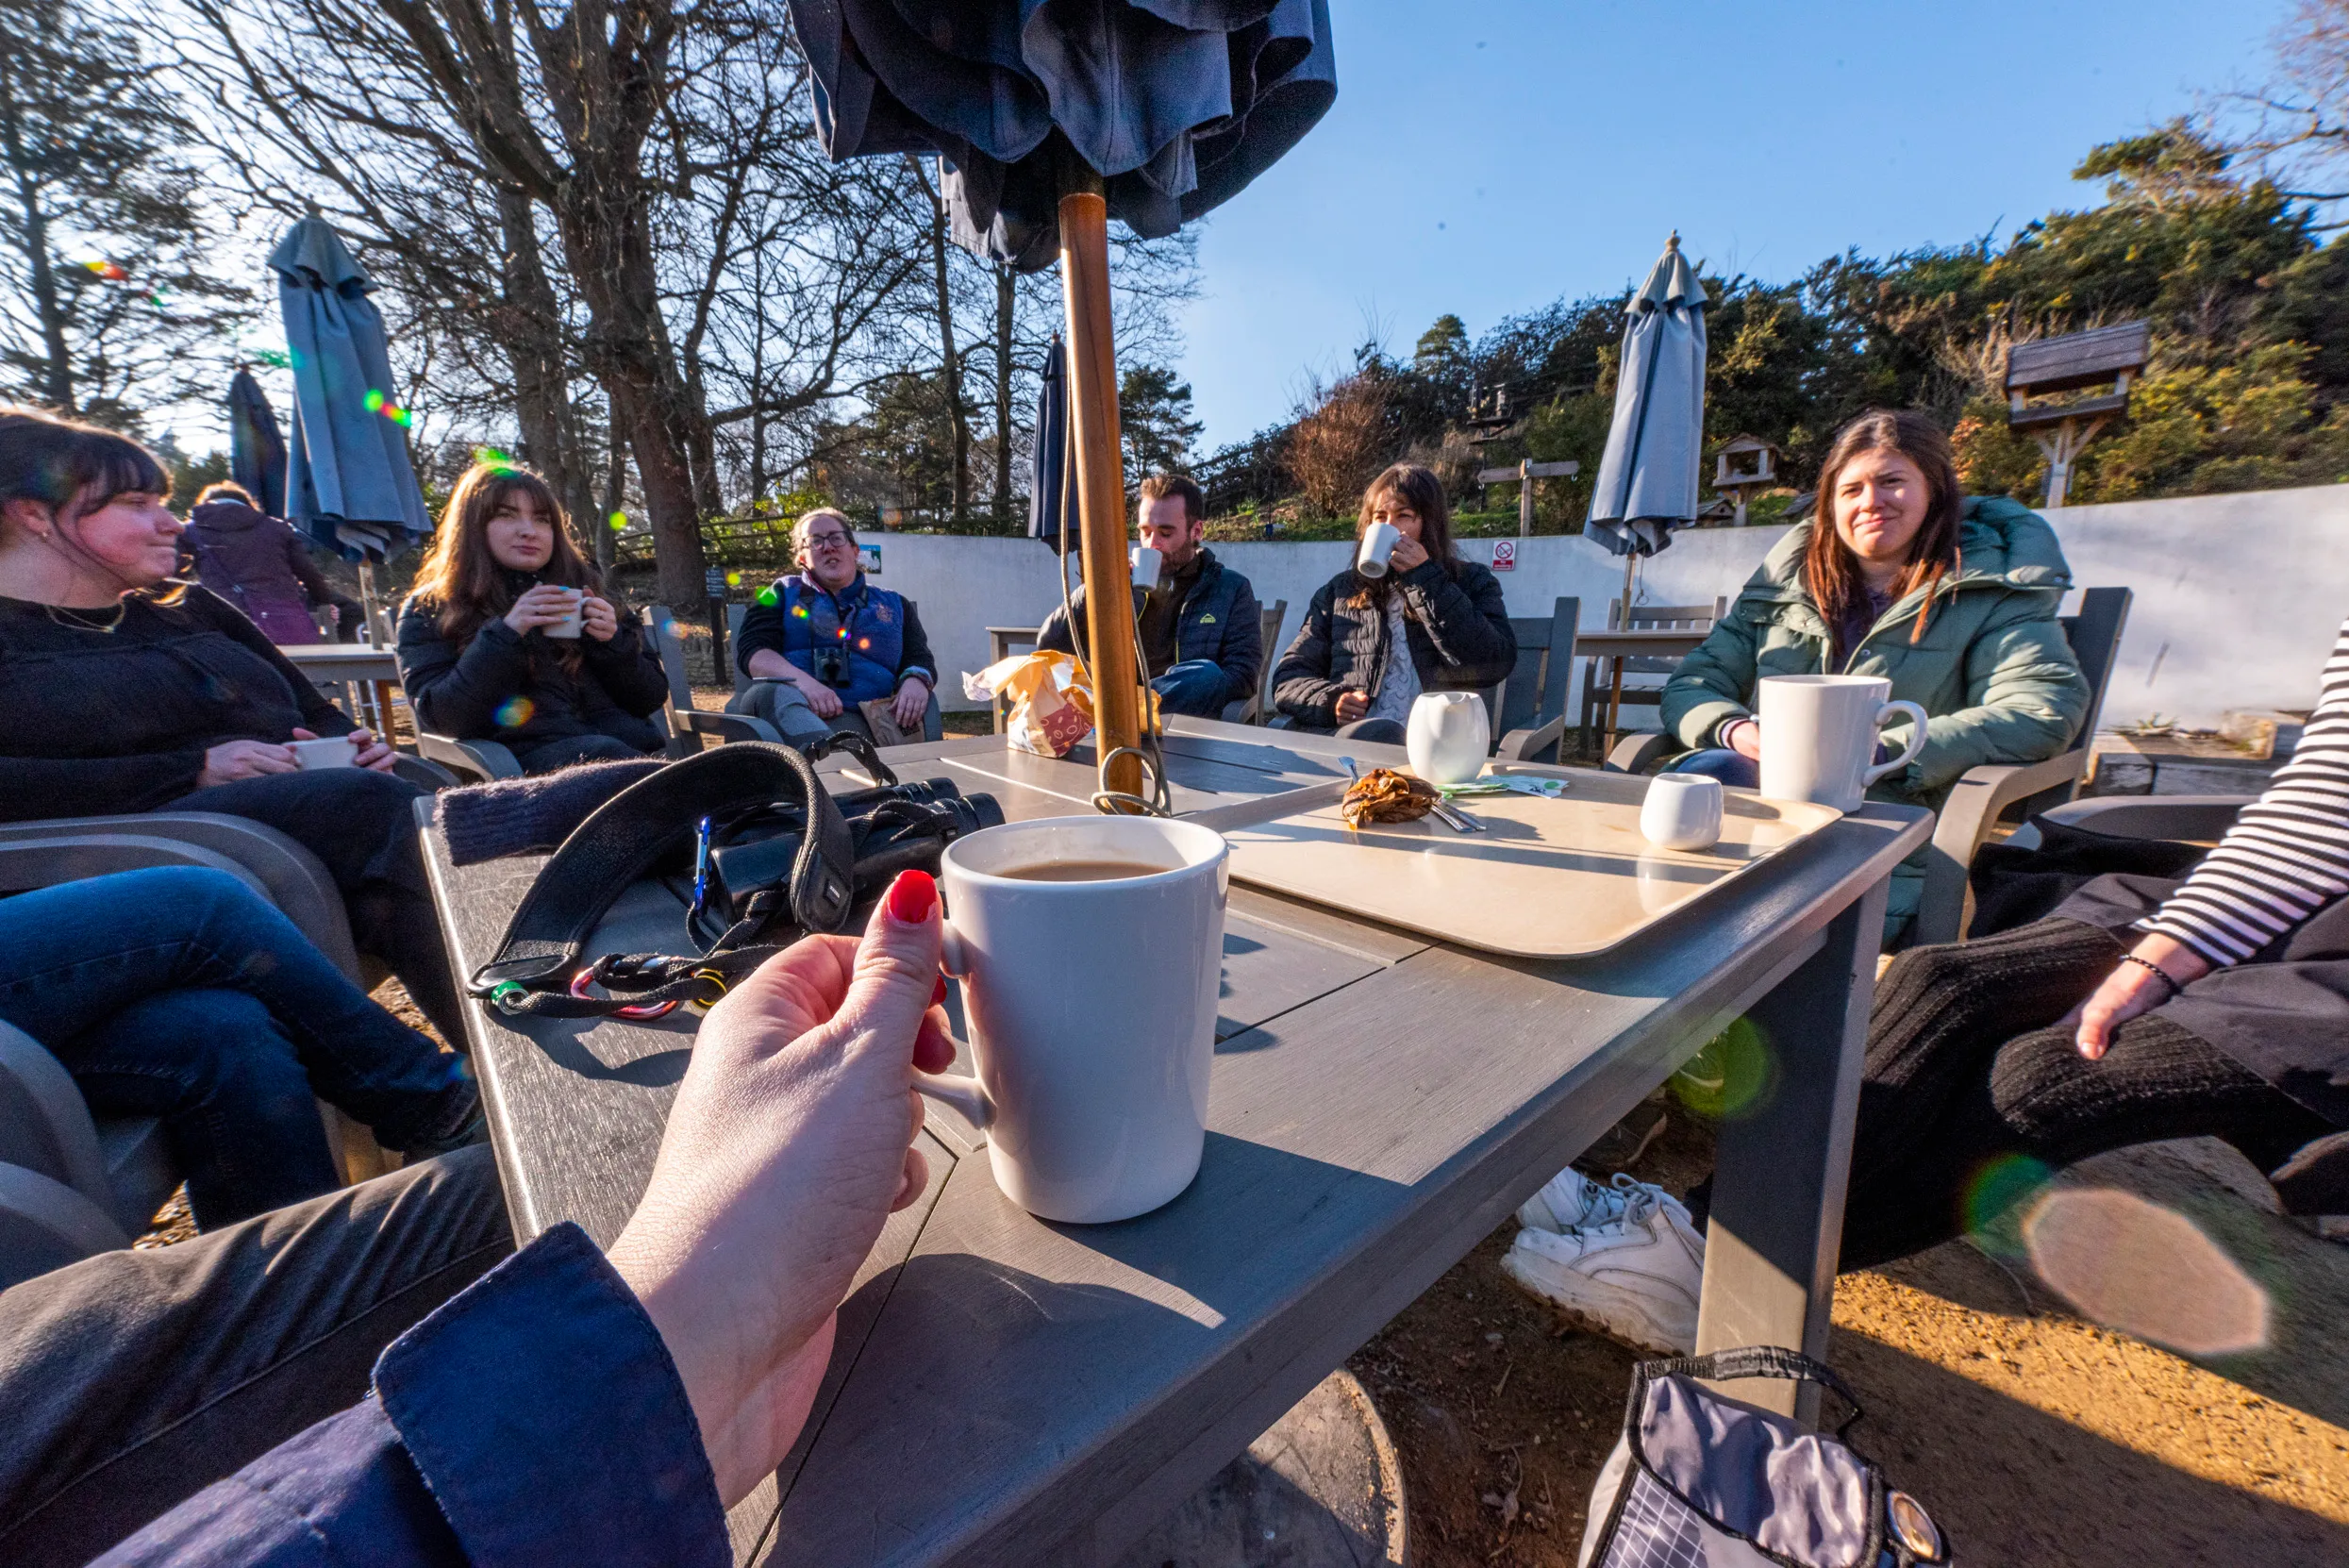 A group of visitors enjoy hot drinks at RSPB Arne on a sunny day.